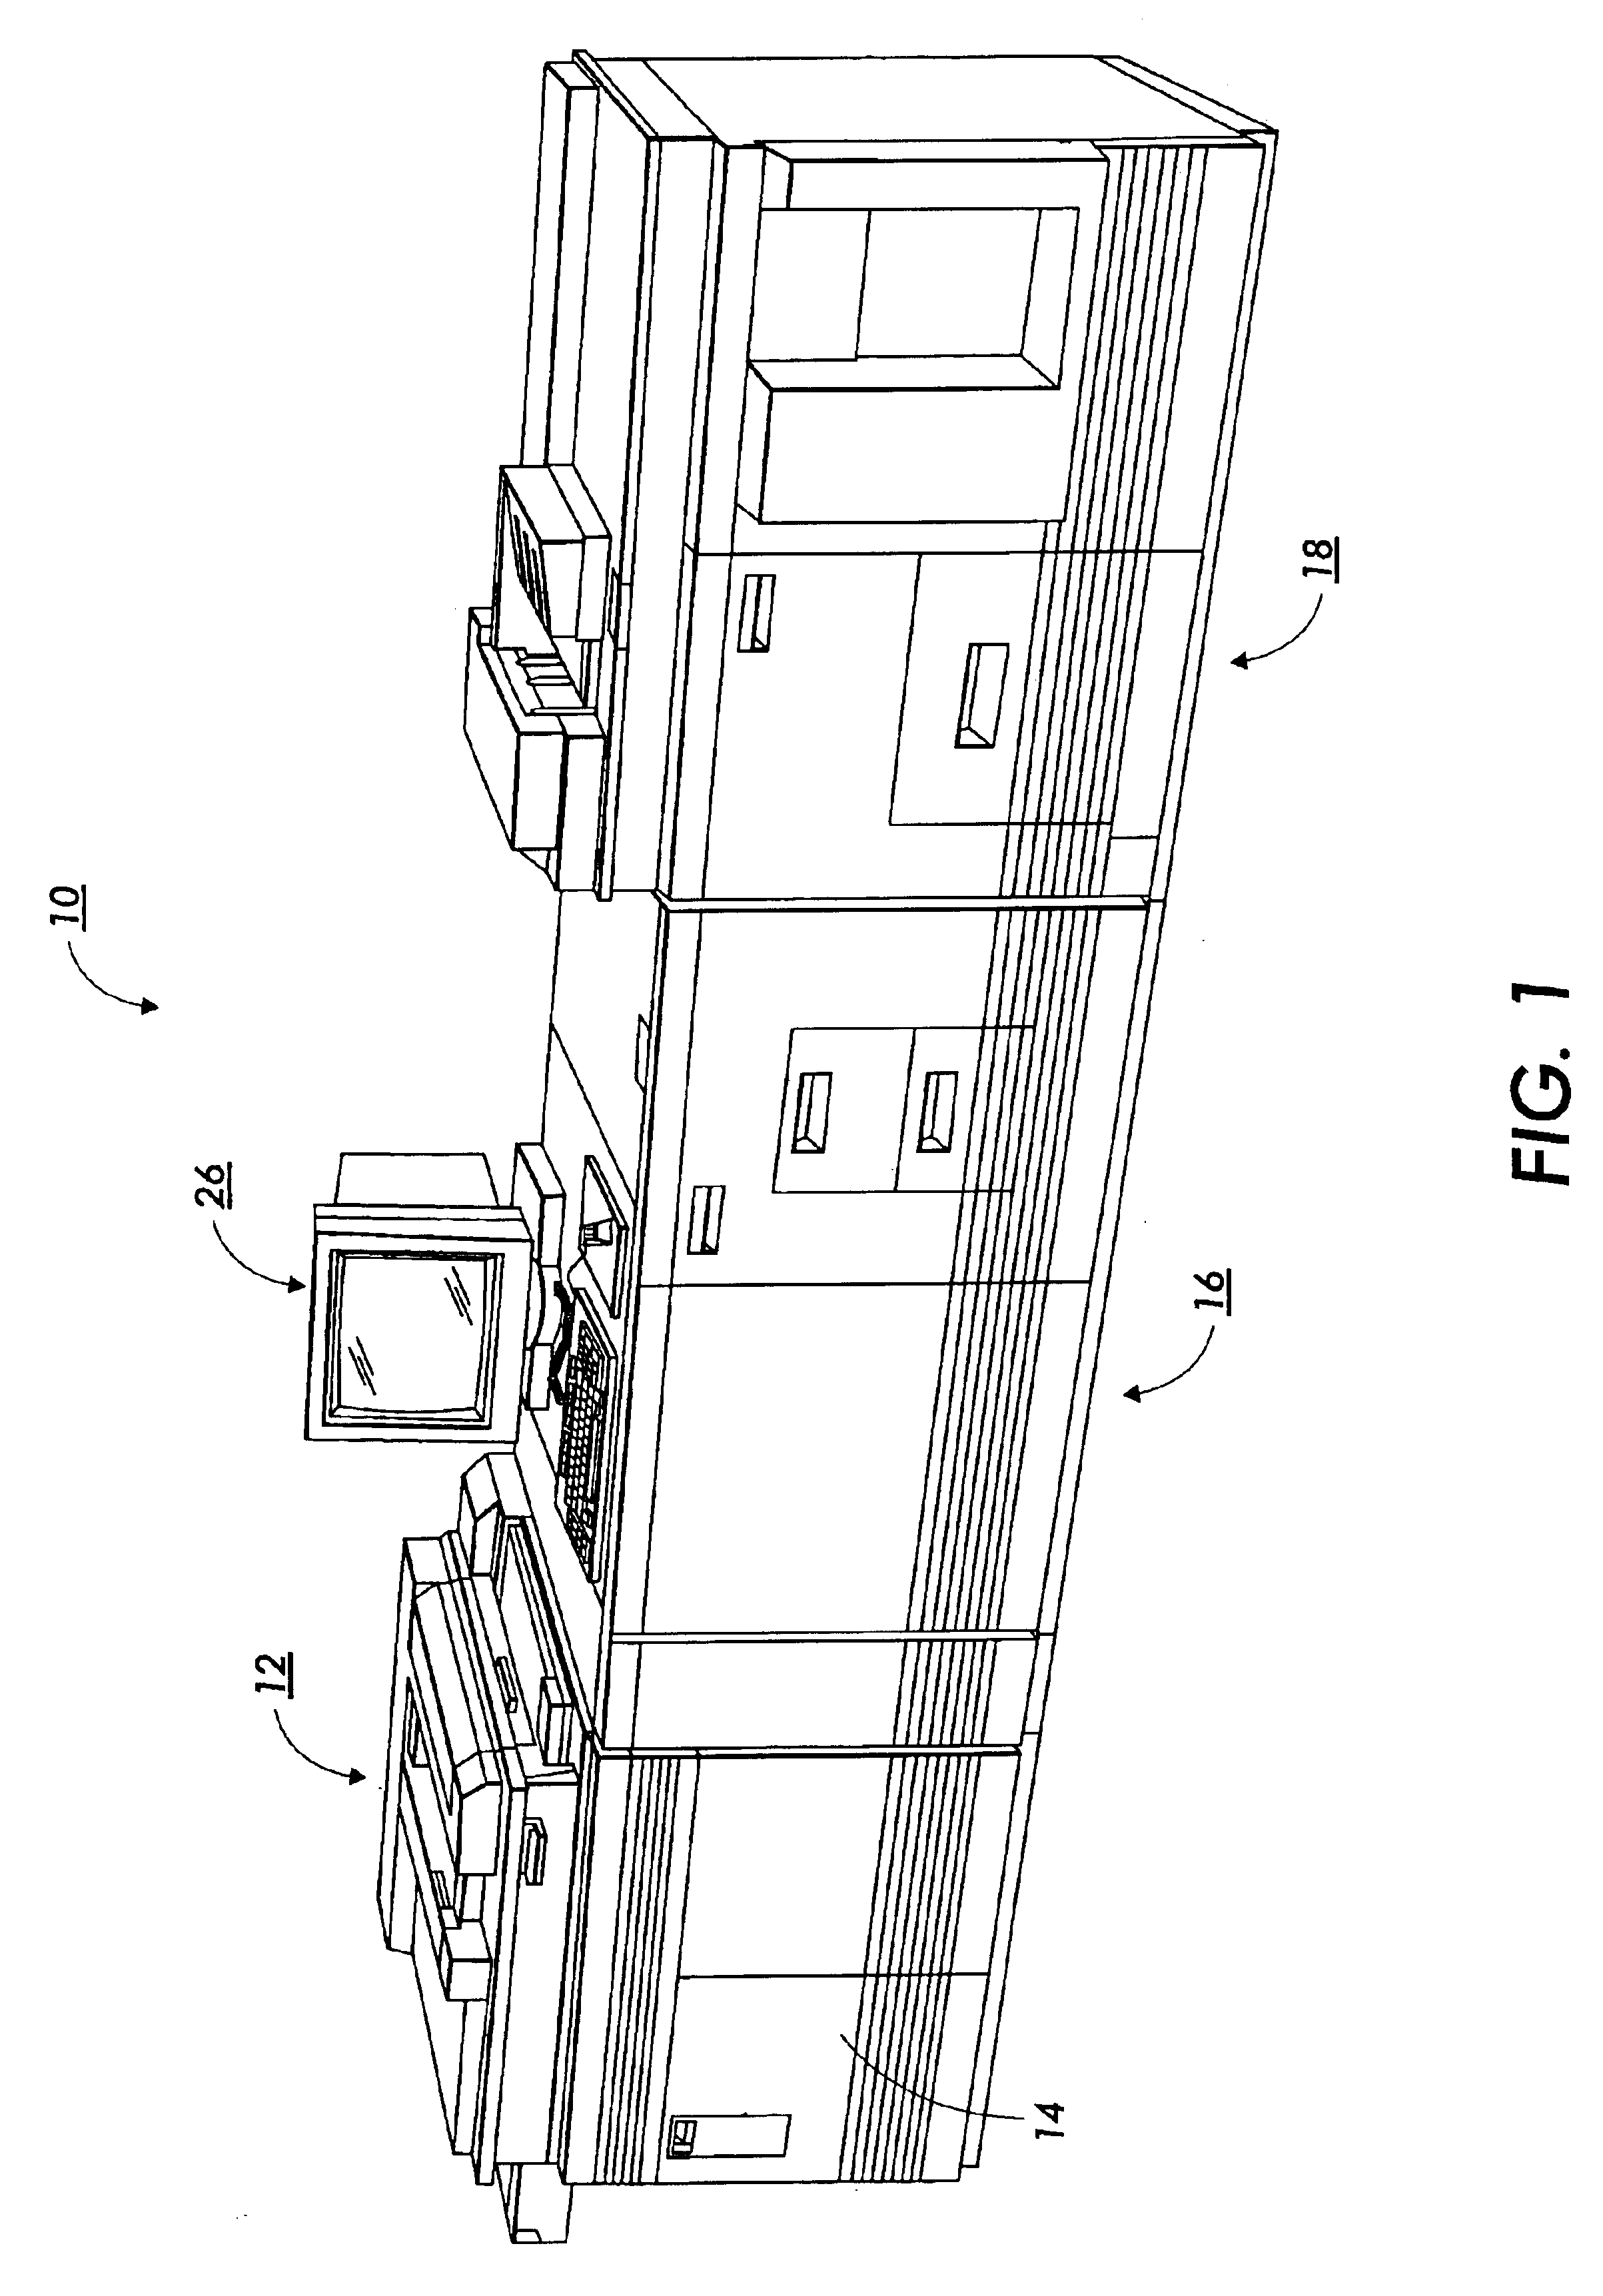 Method and apparatus to provide alternate or abstract finishing to a print job